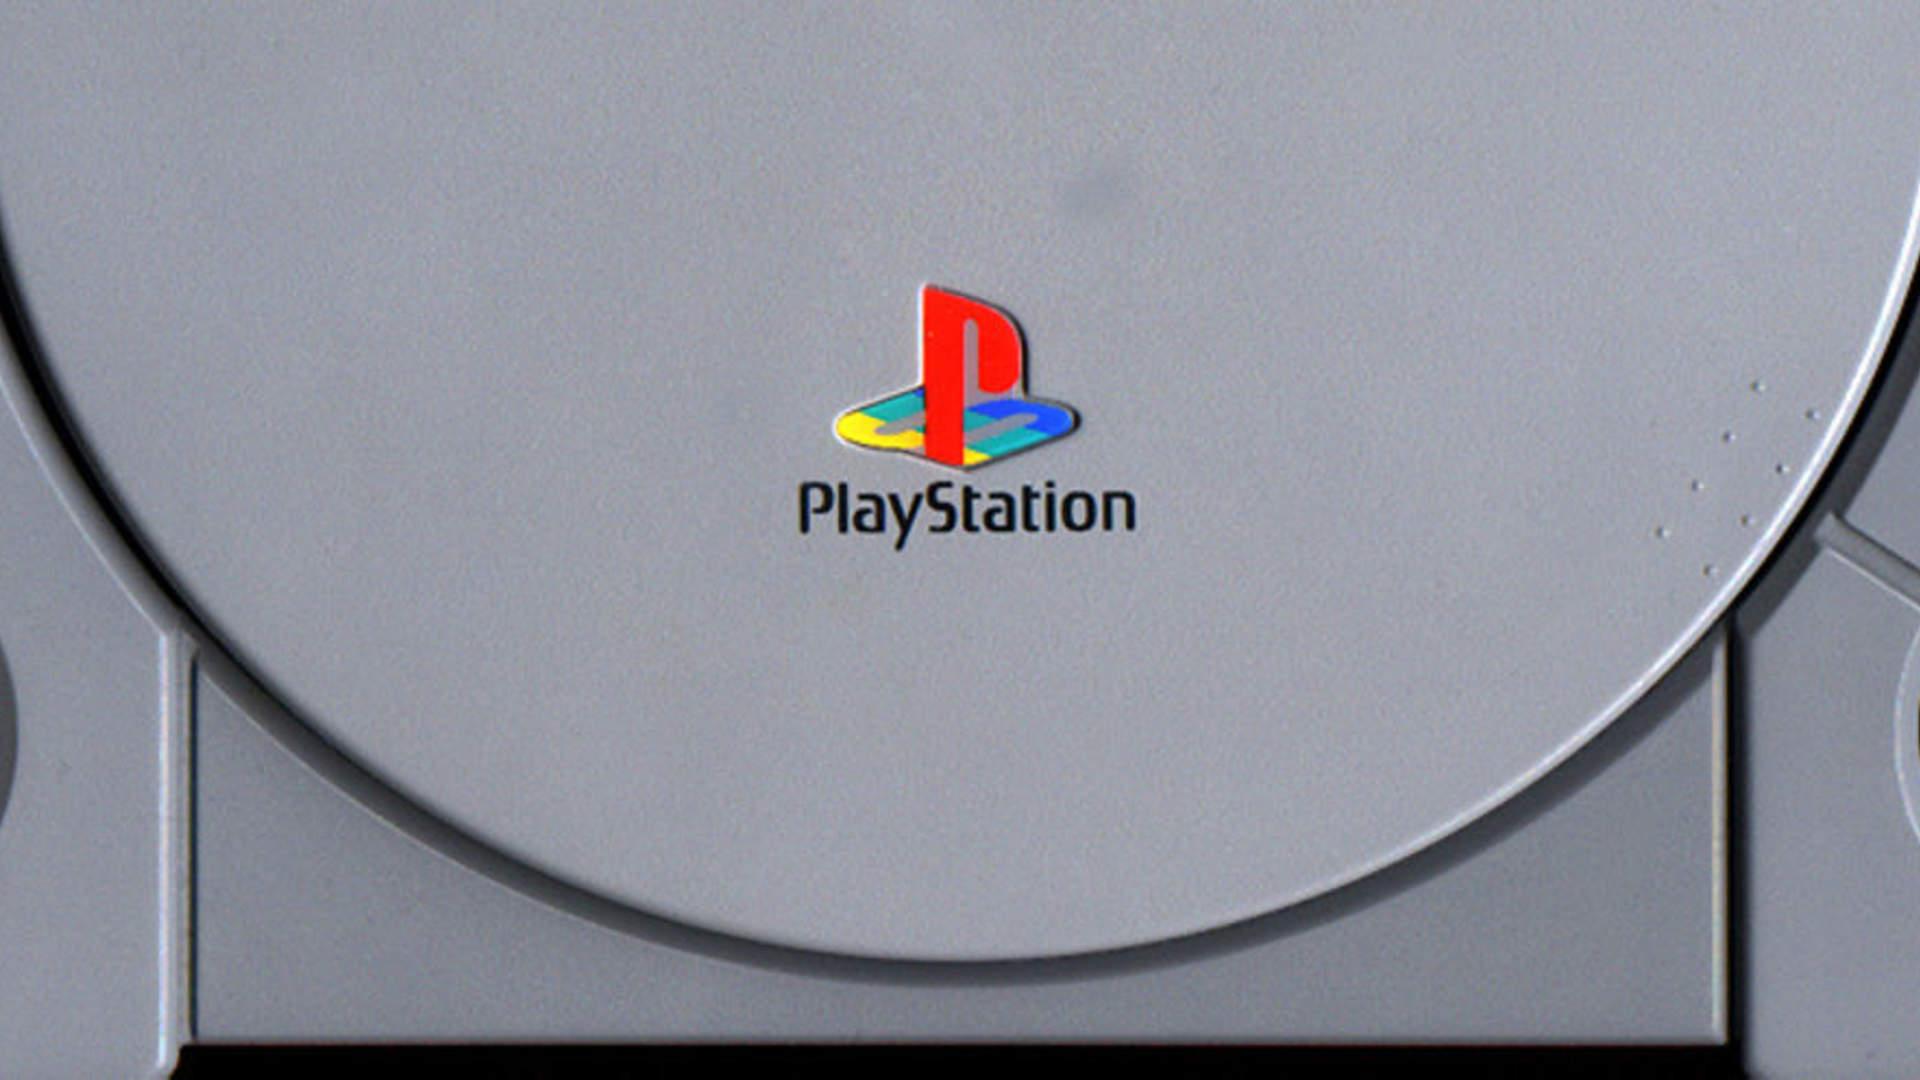 Why the Contribution Retro Consoles Like PlayStation Classic